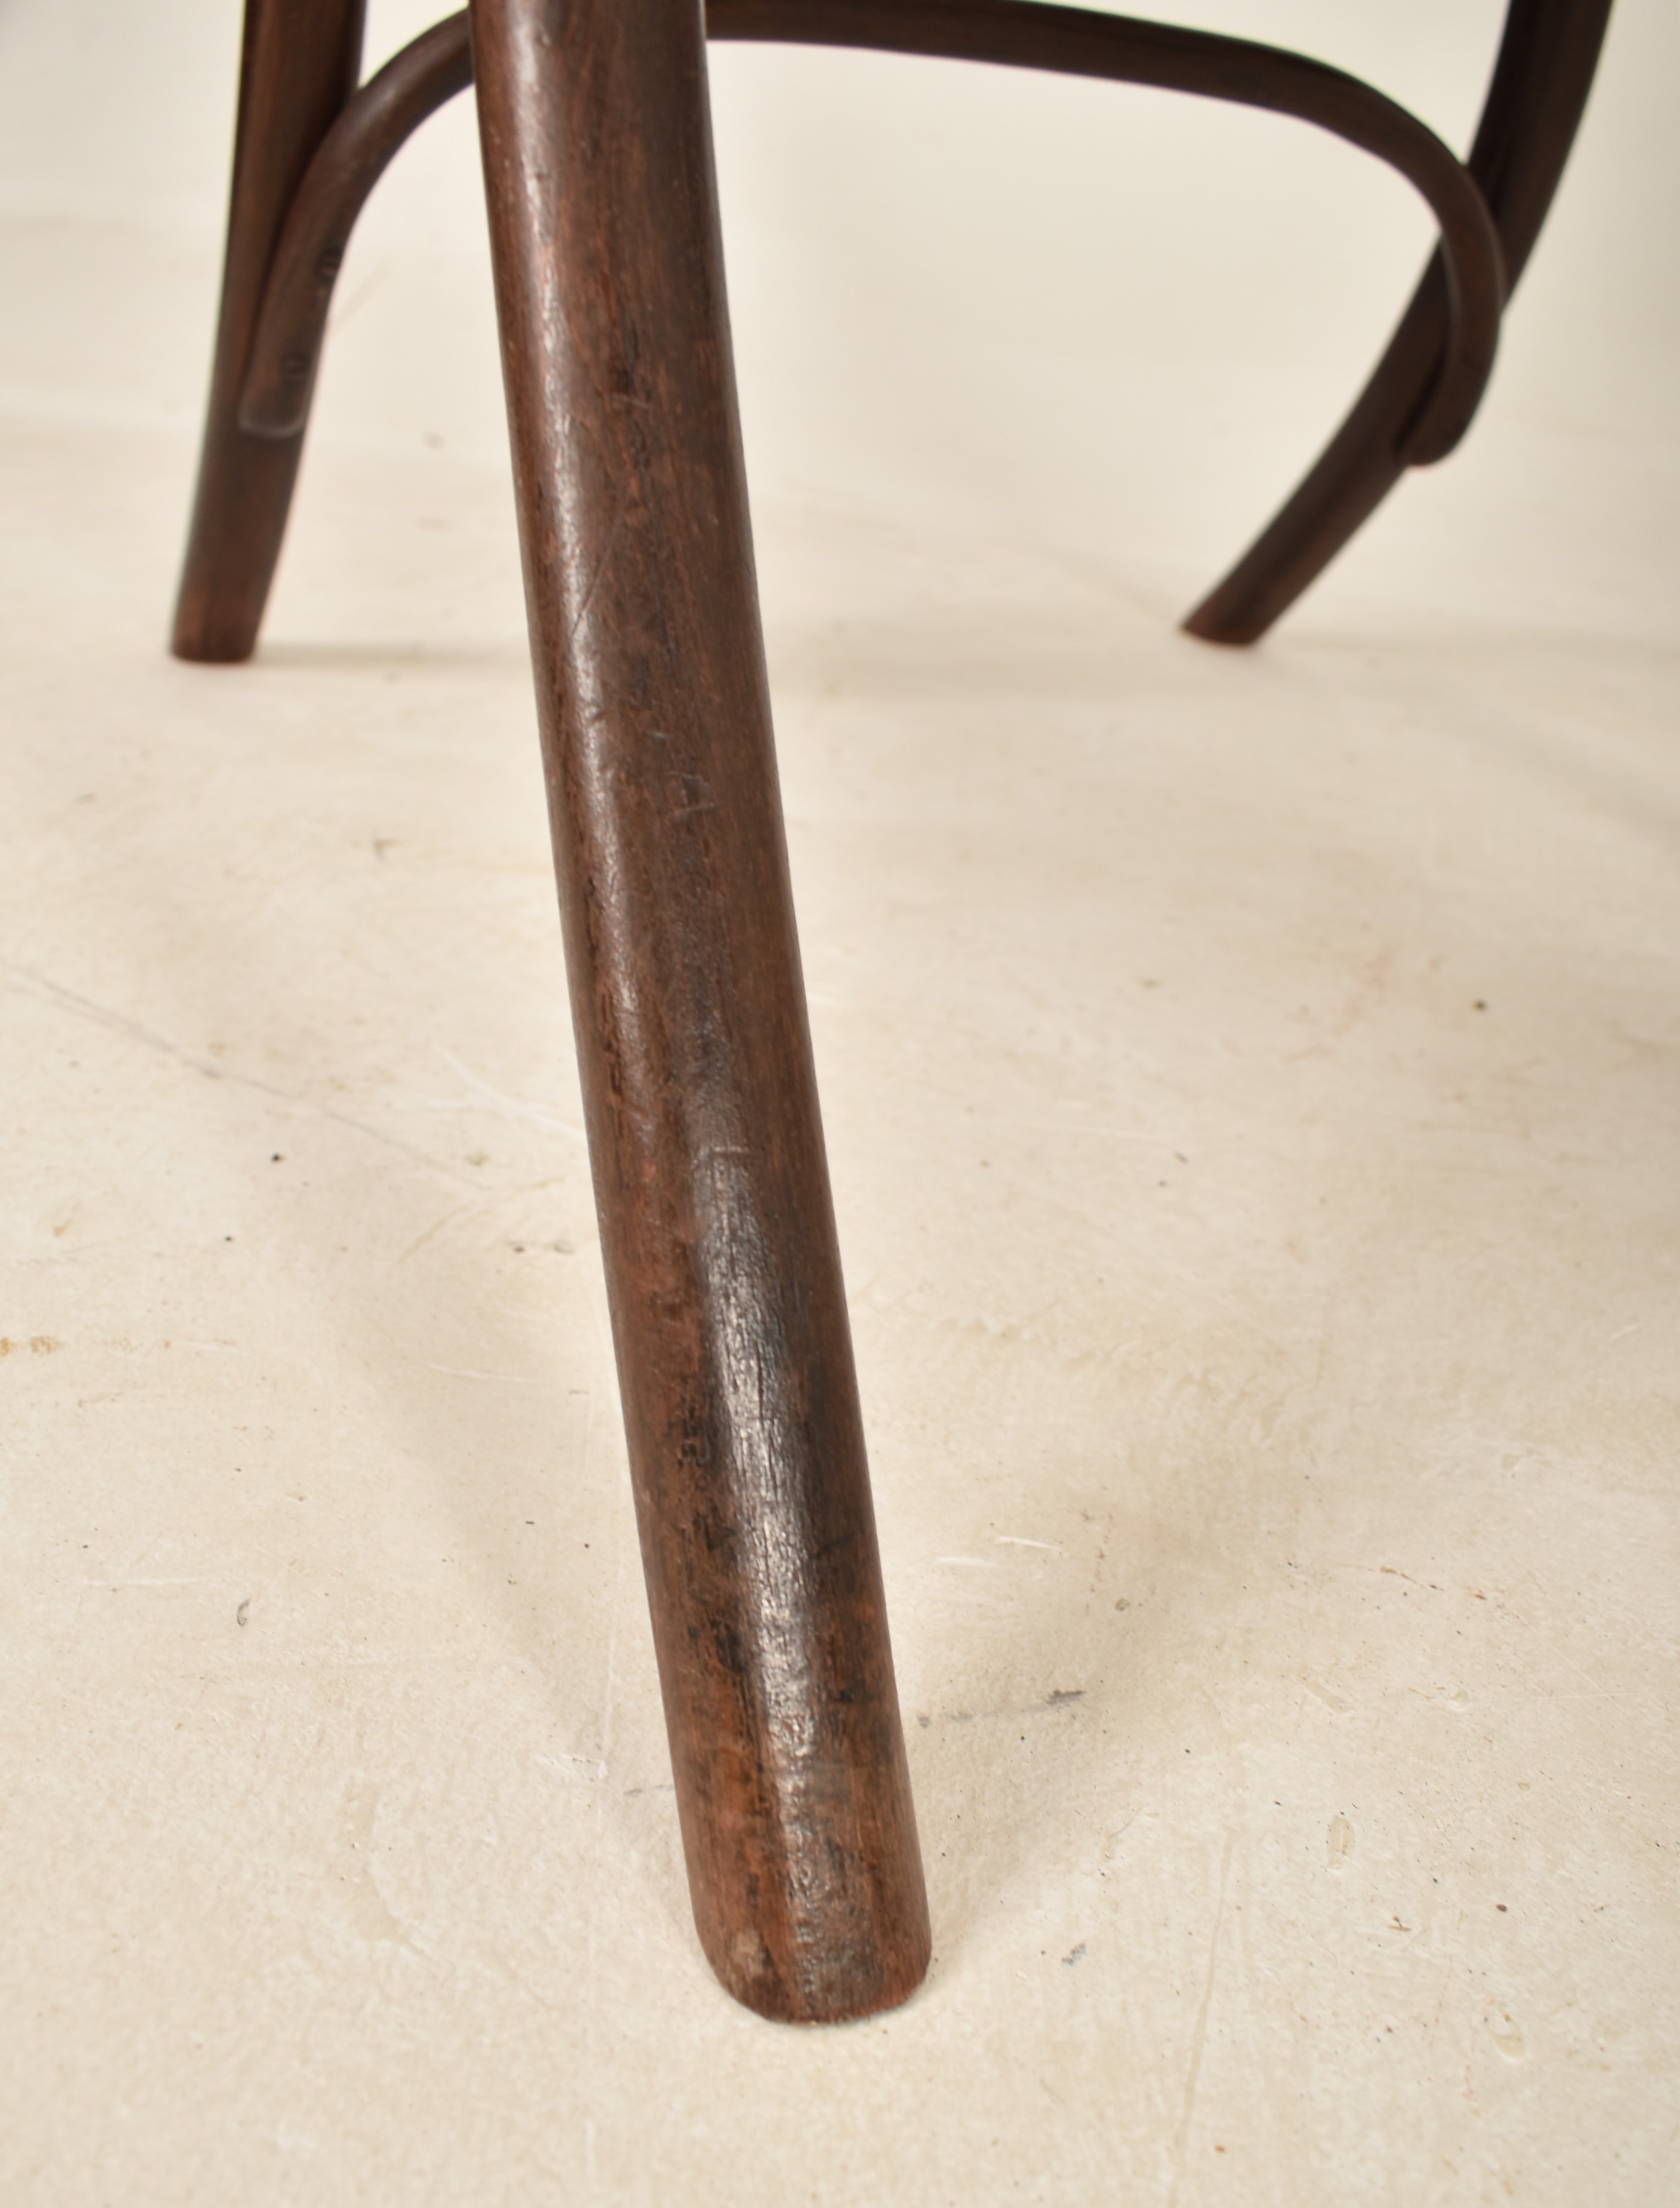 THONET - EARLY 20TH CENTURY BENTWOOD & CANE FIRESIDE ARMCHAIR - Image 5 of 7